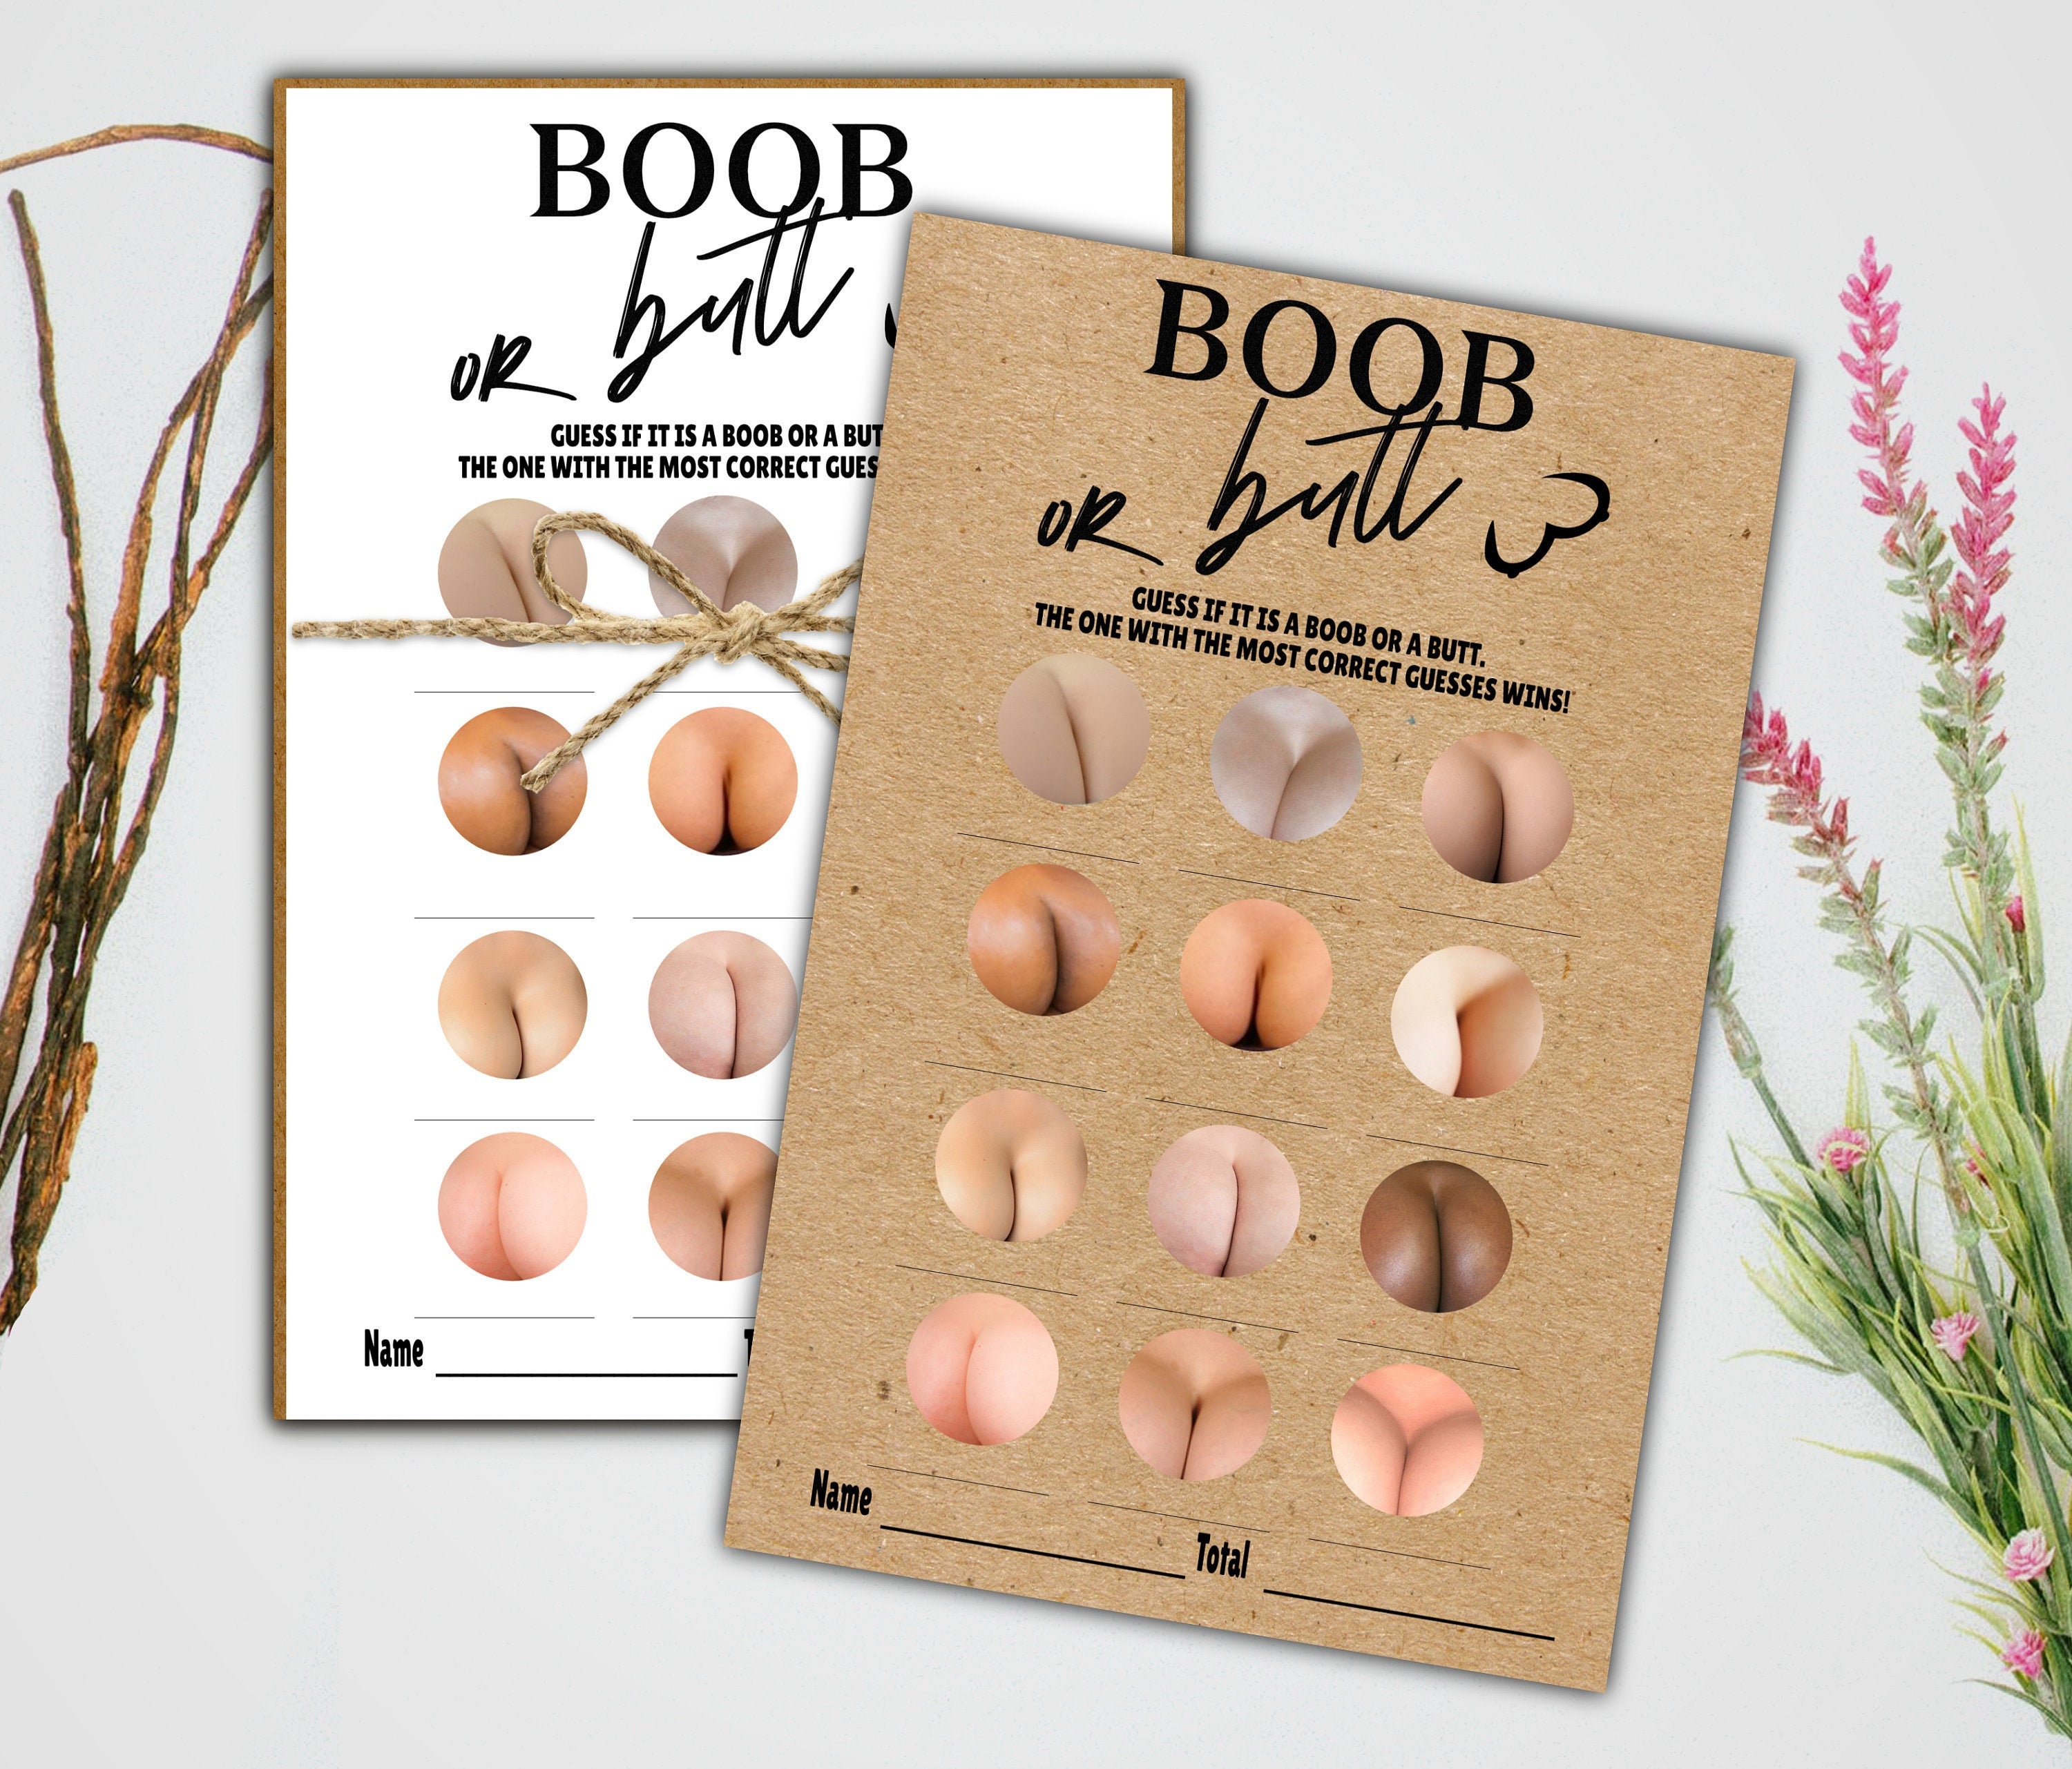 The boob game